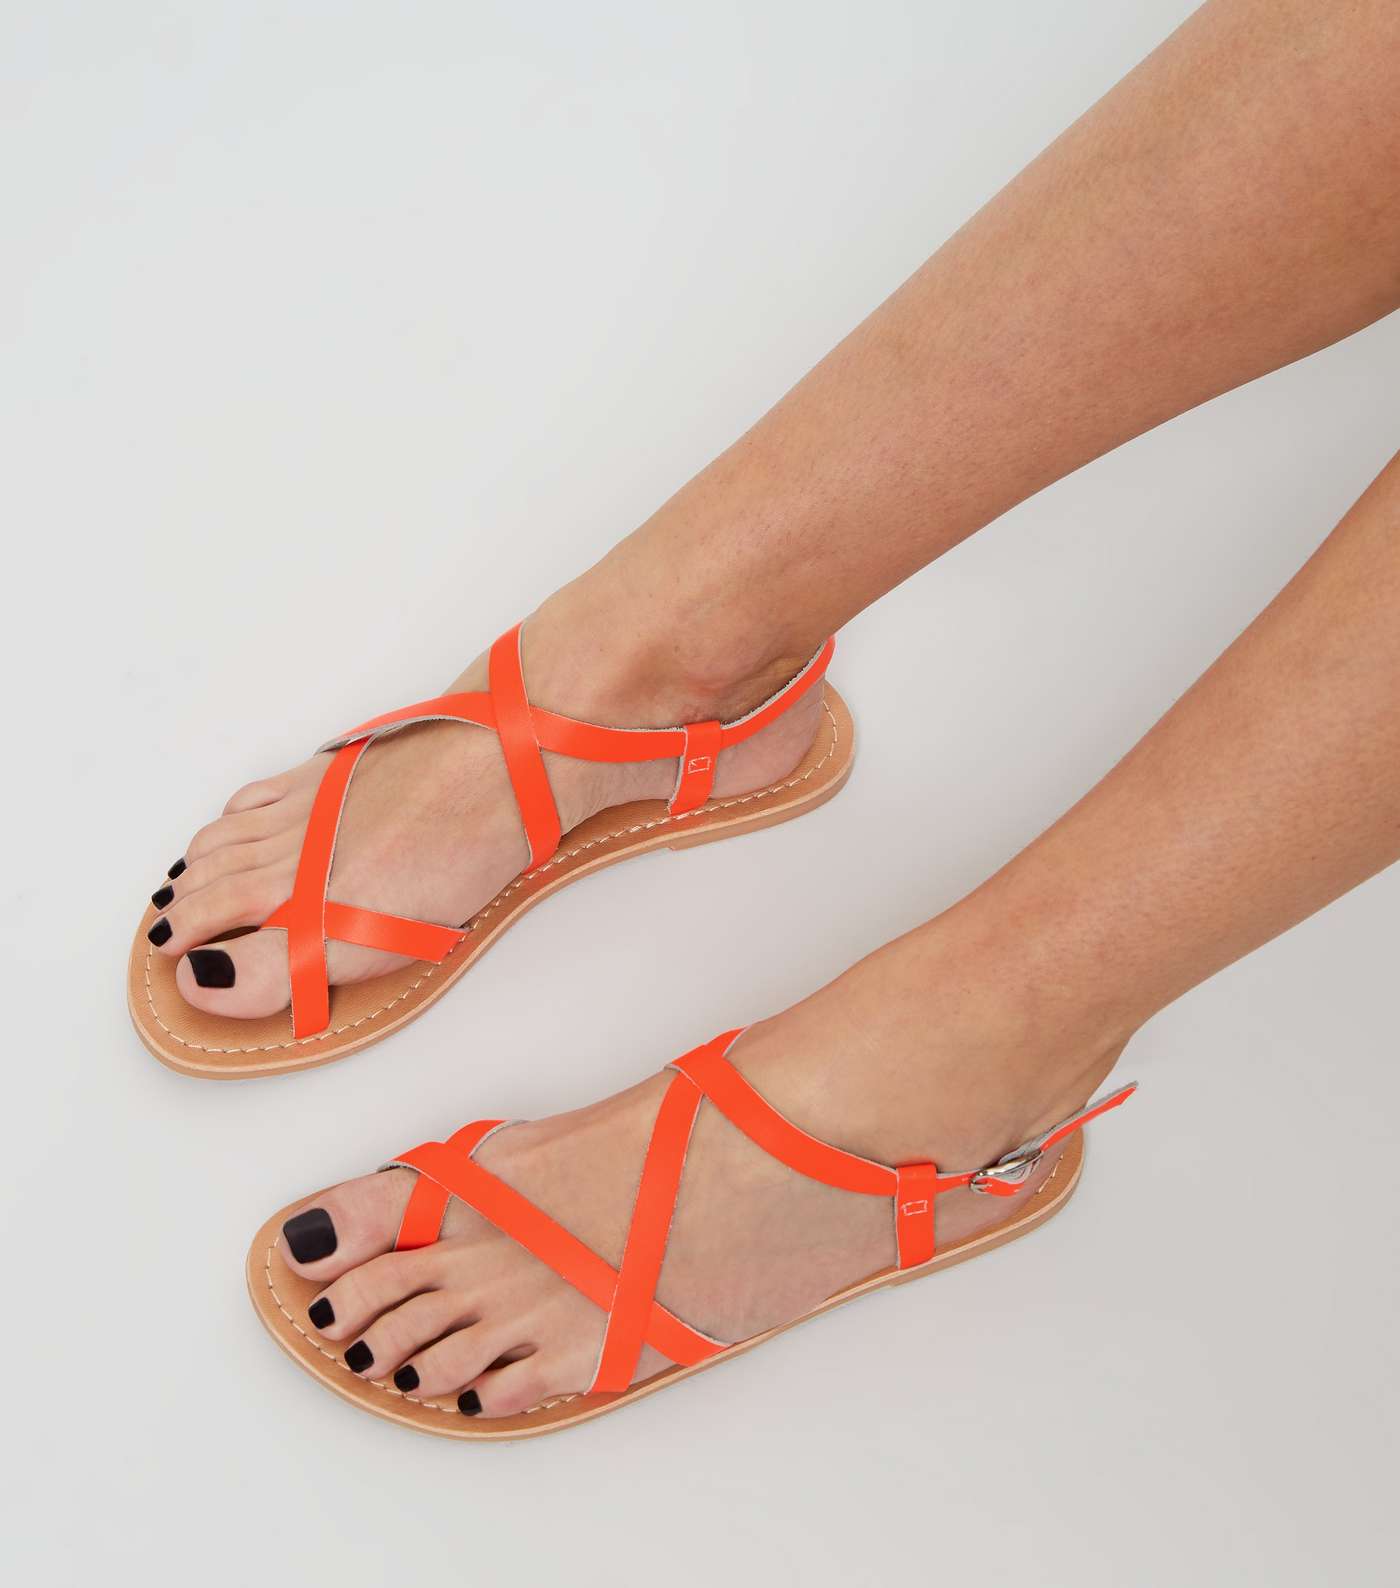 Coral Neon Leather Strappy Flat Sandals Image 2